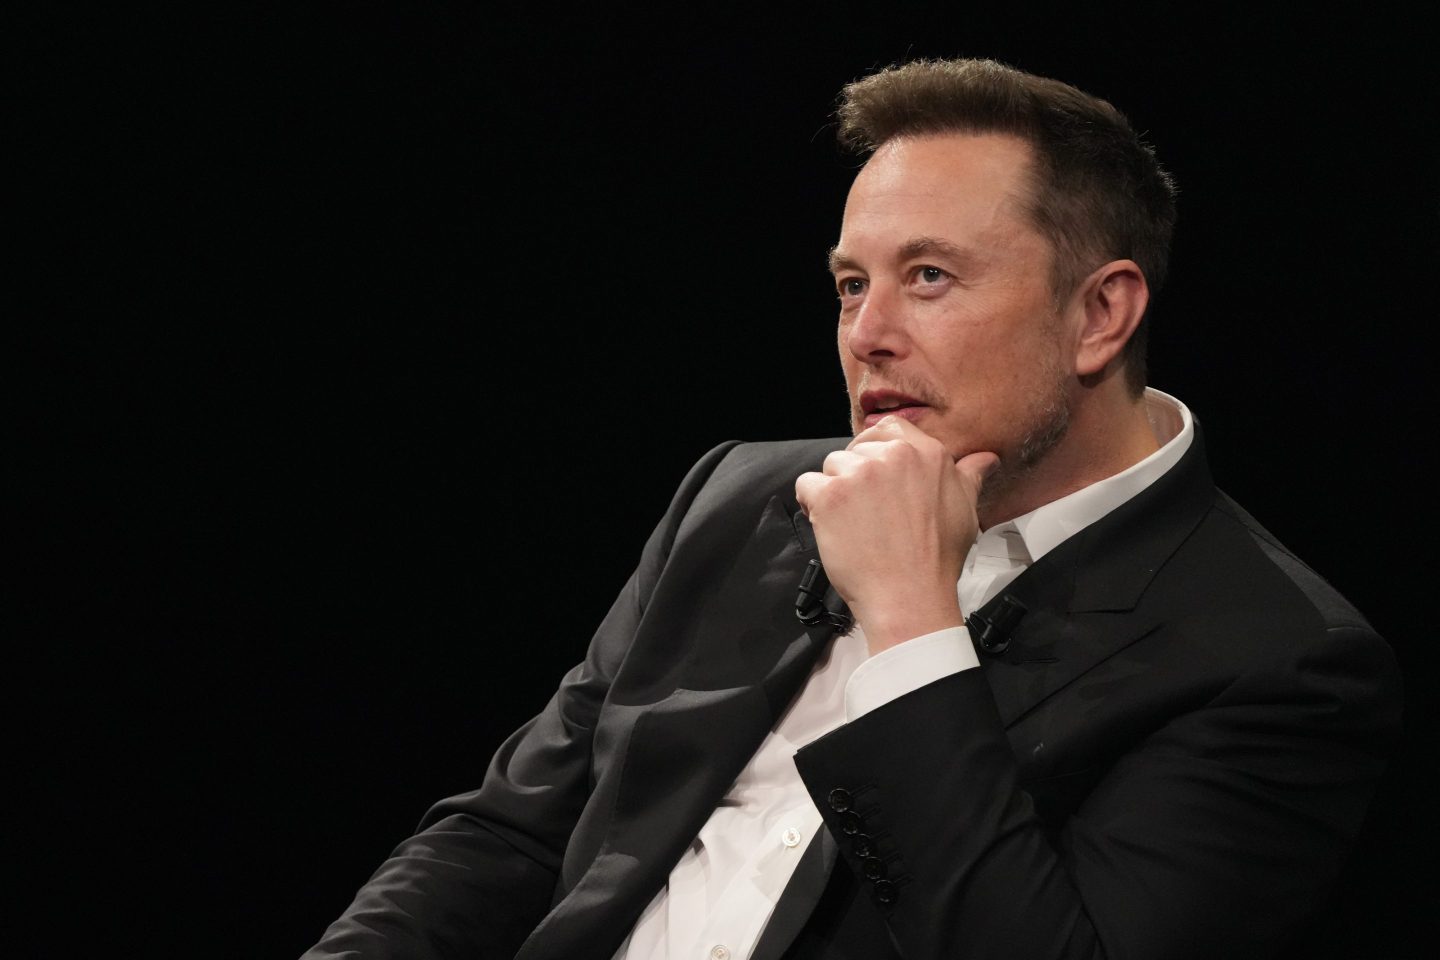 Elon Musk admitted he's just as clueless as the rest of us when it comes to the outlook for the economy.